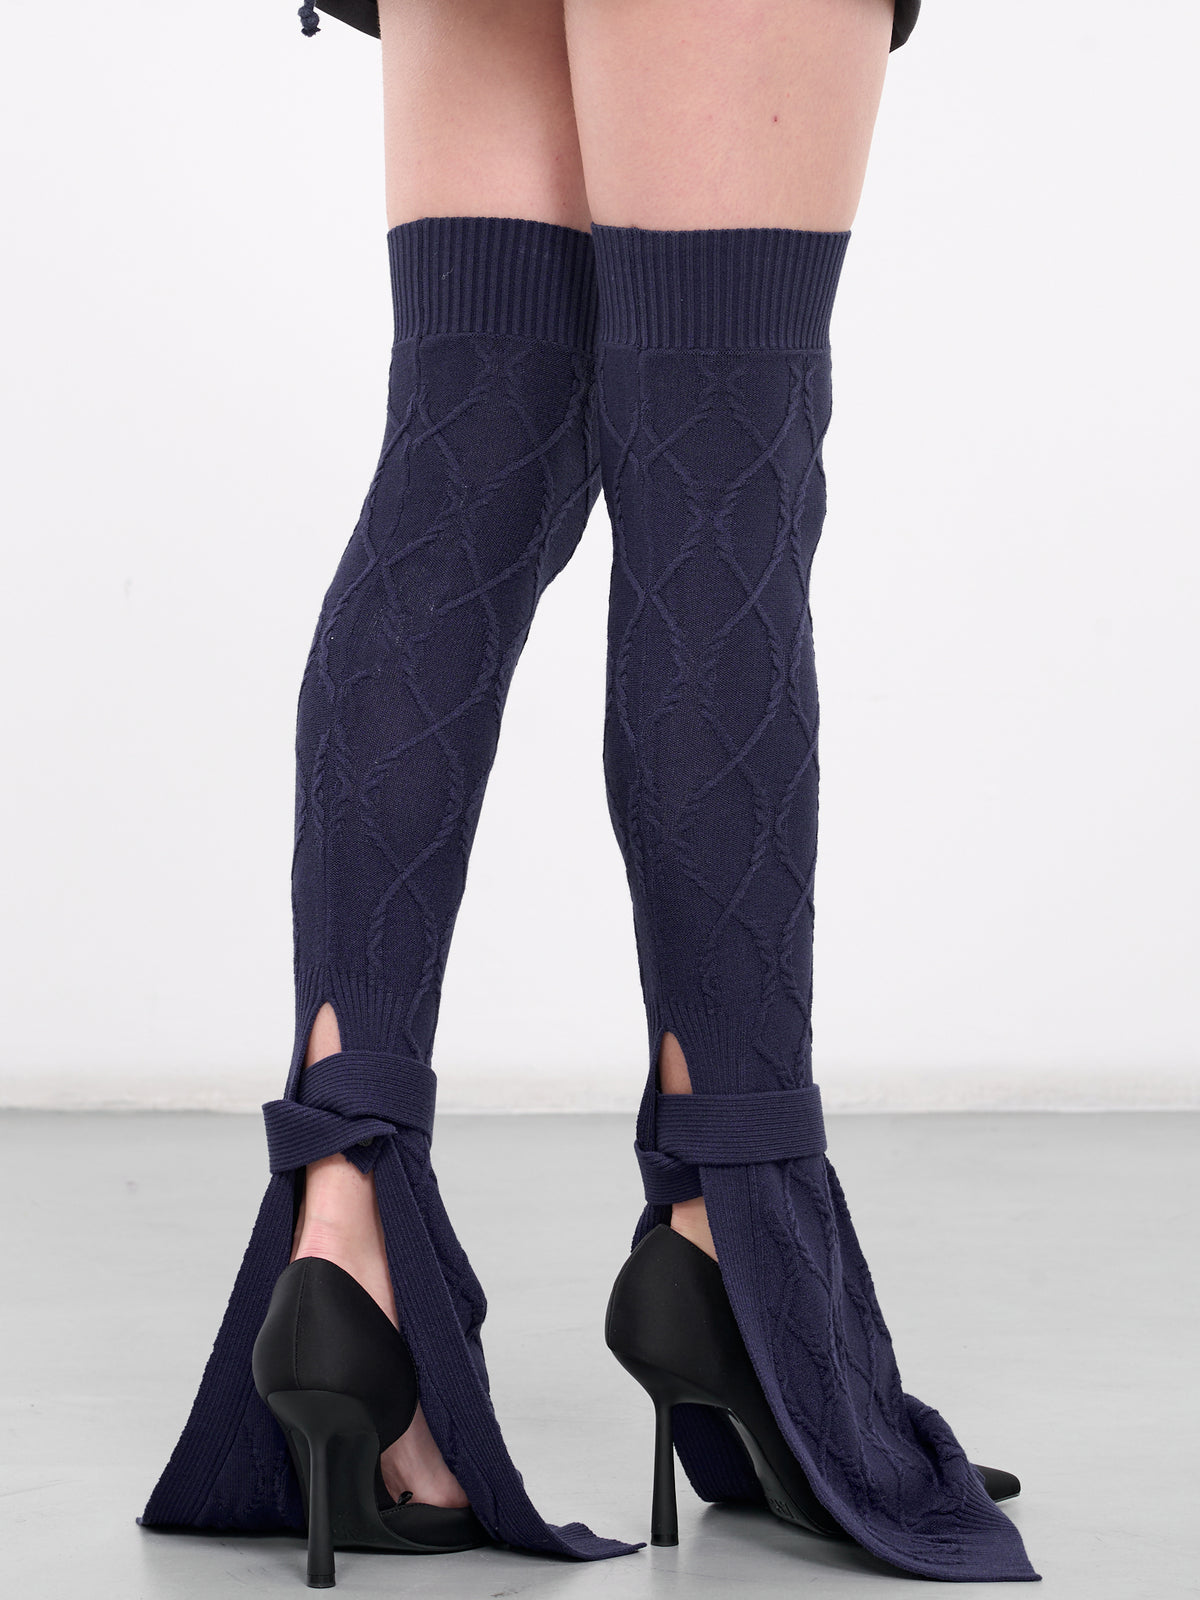 Cable-Knit Leg Warmers (998-004-NAVY)